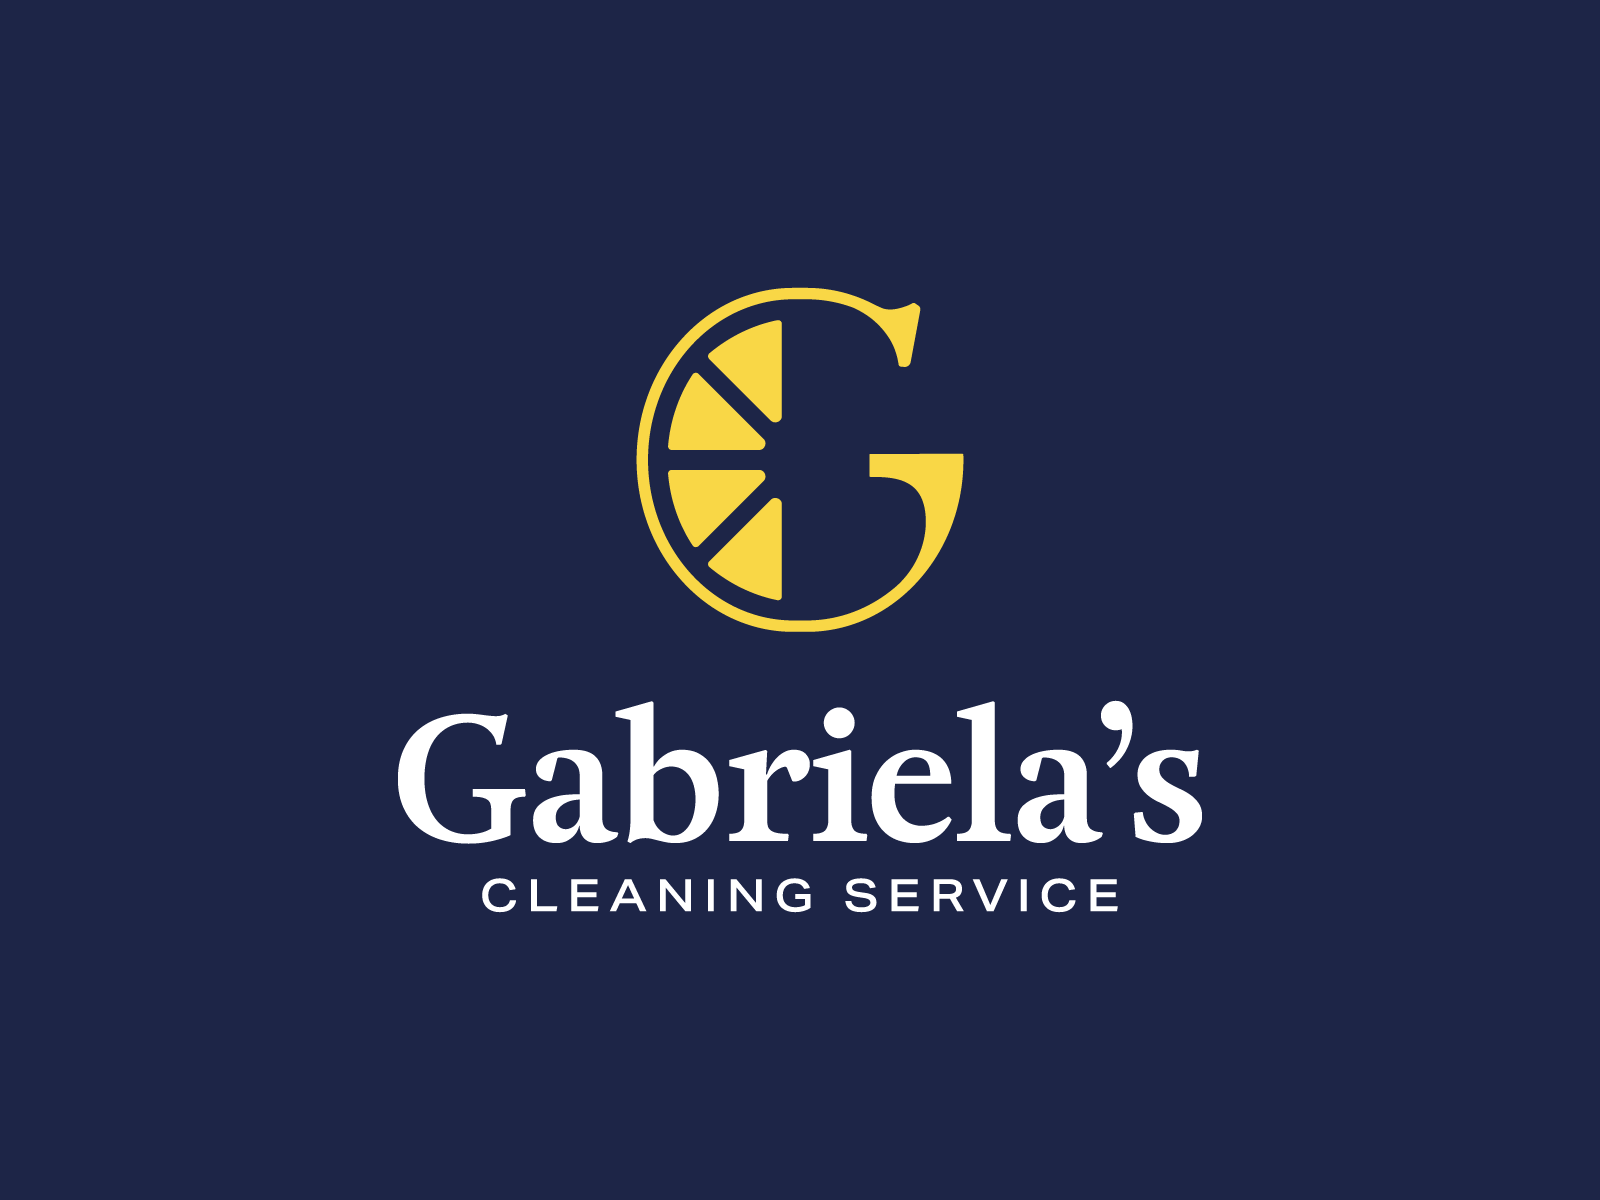 Logo and Branding - Gabriela's Cleaning Service